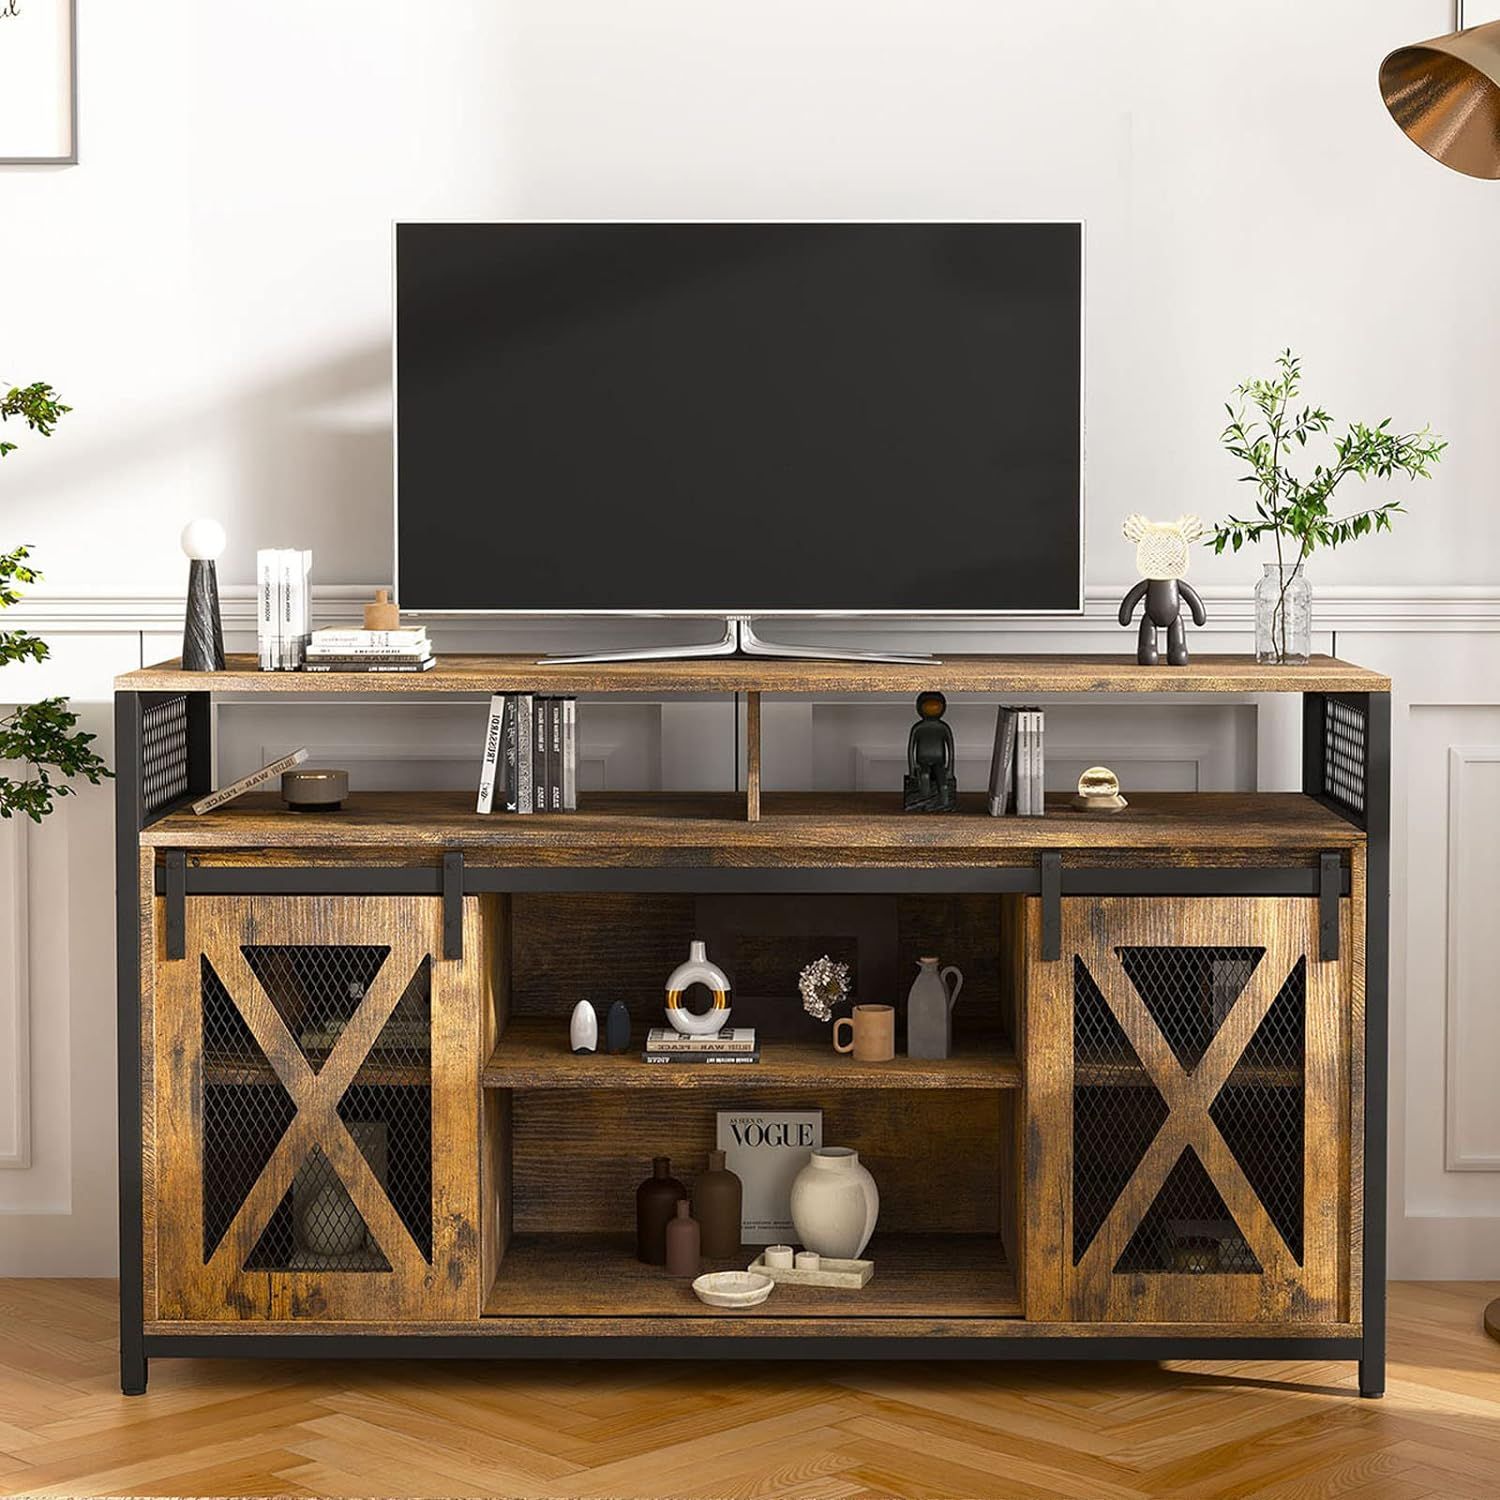 Nolany Tv Stand With Sliding Barn Doors, India | Ubuy Throughout Barn Door Media Tv Stands (View 10 of 15)